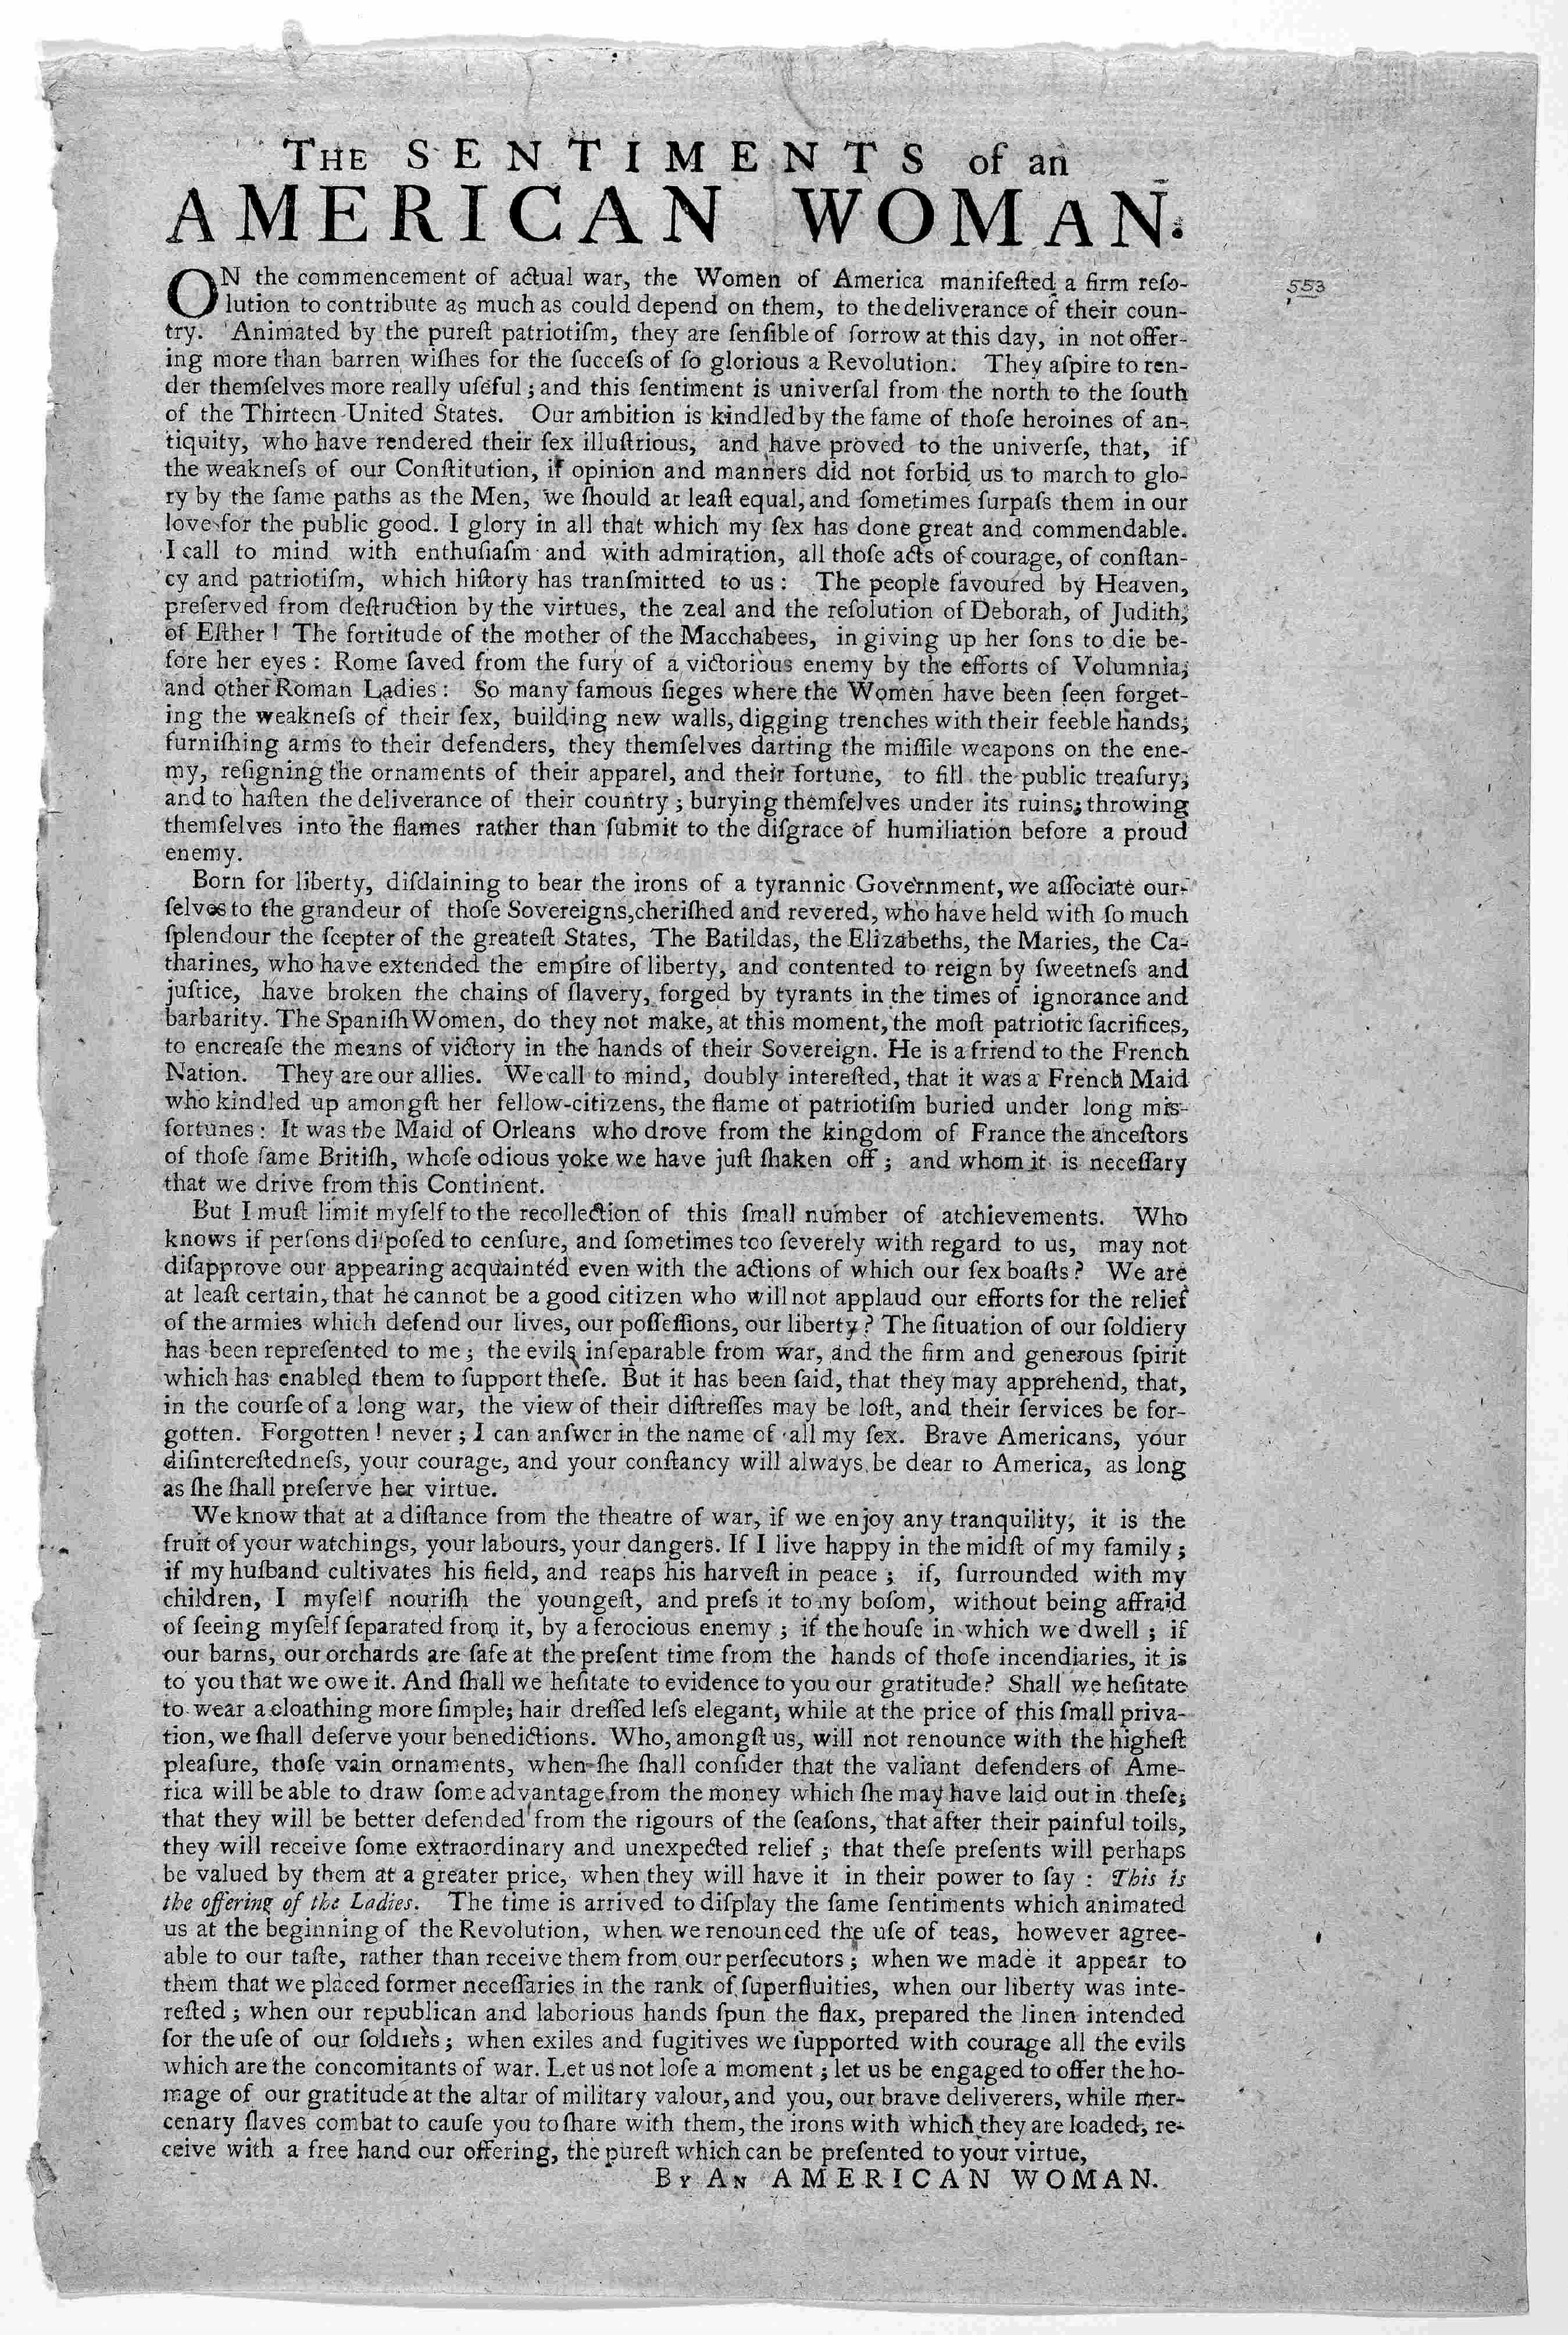 Photo of "Sentiments of an American Woman" broadside.